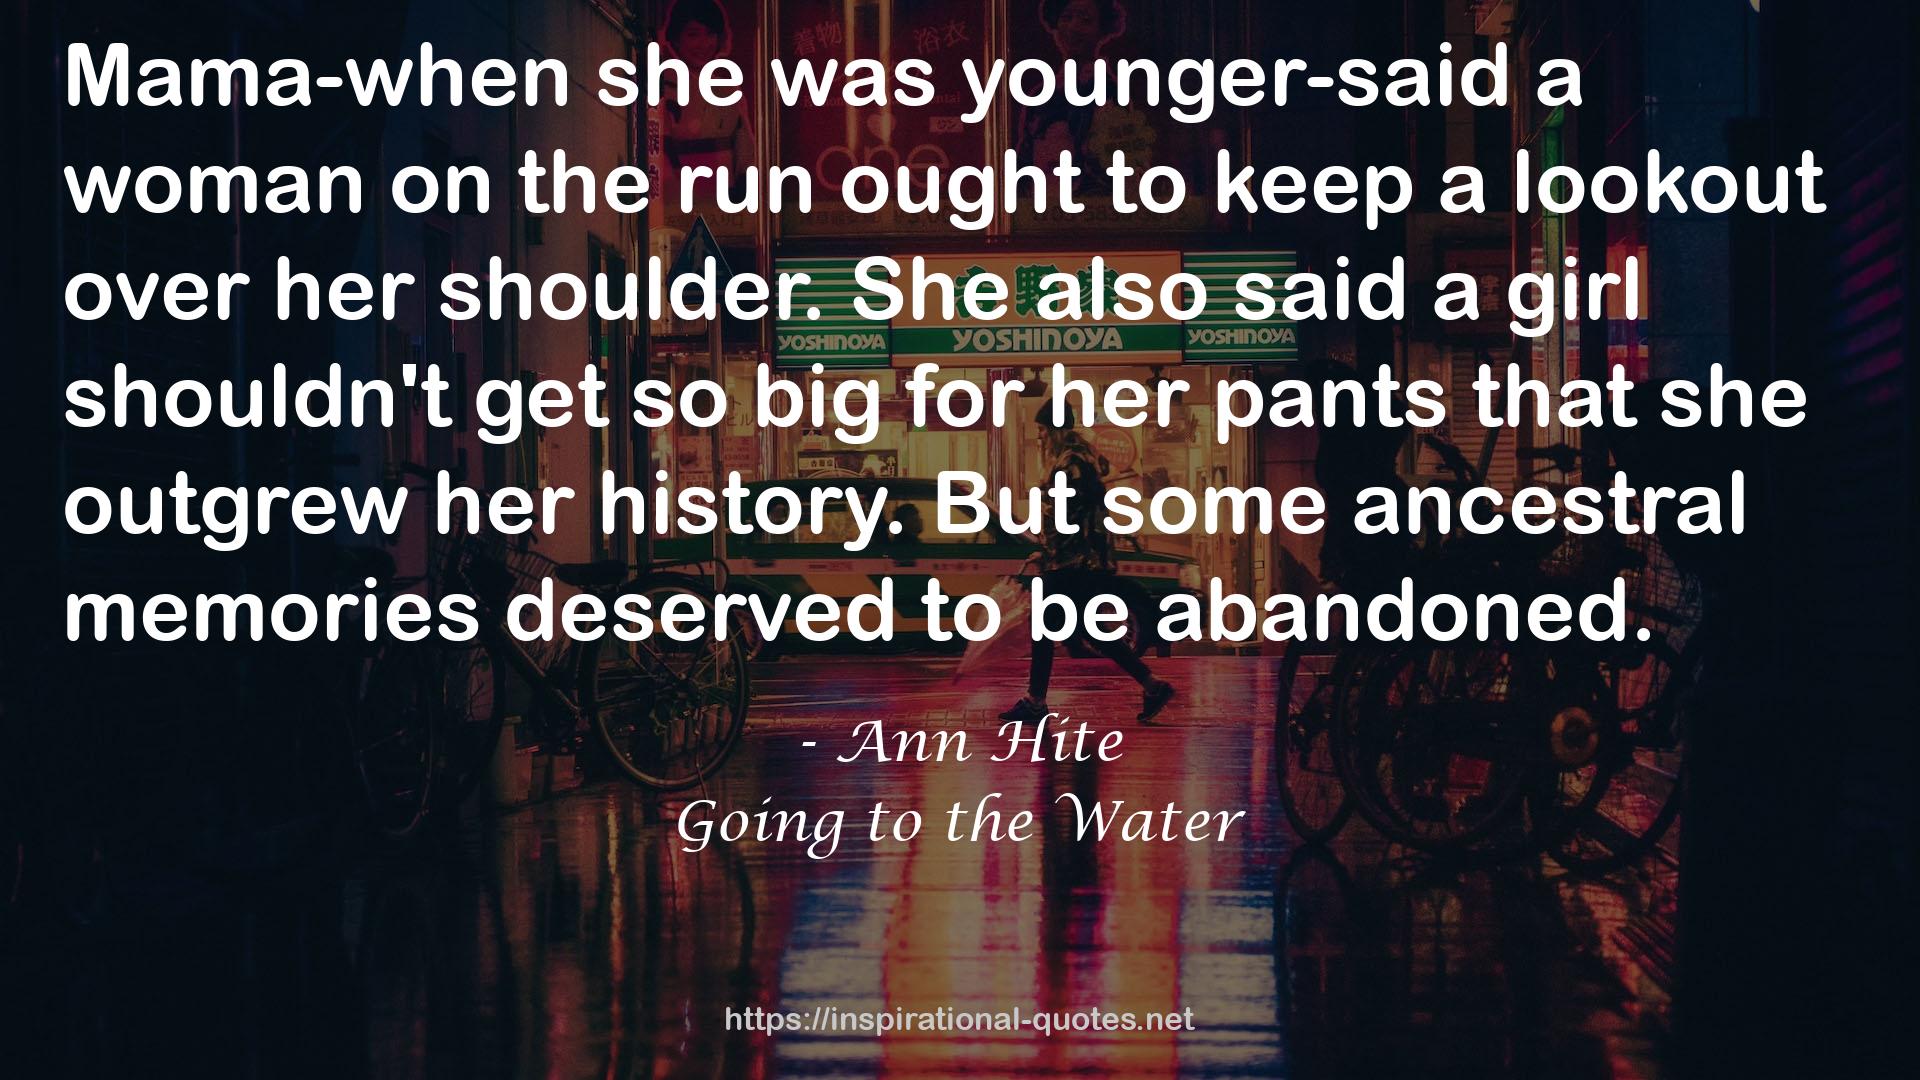 Going to the Water QUOTES